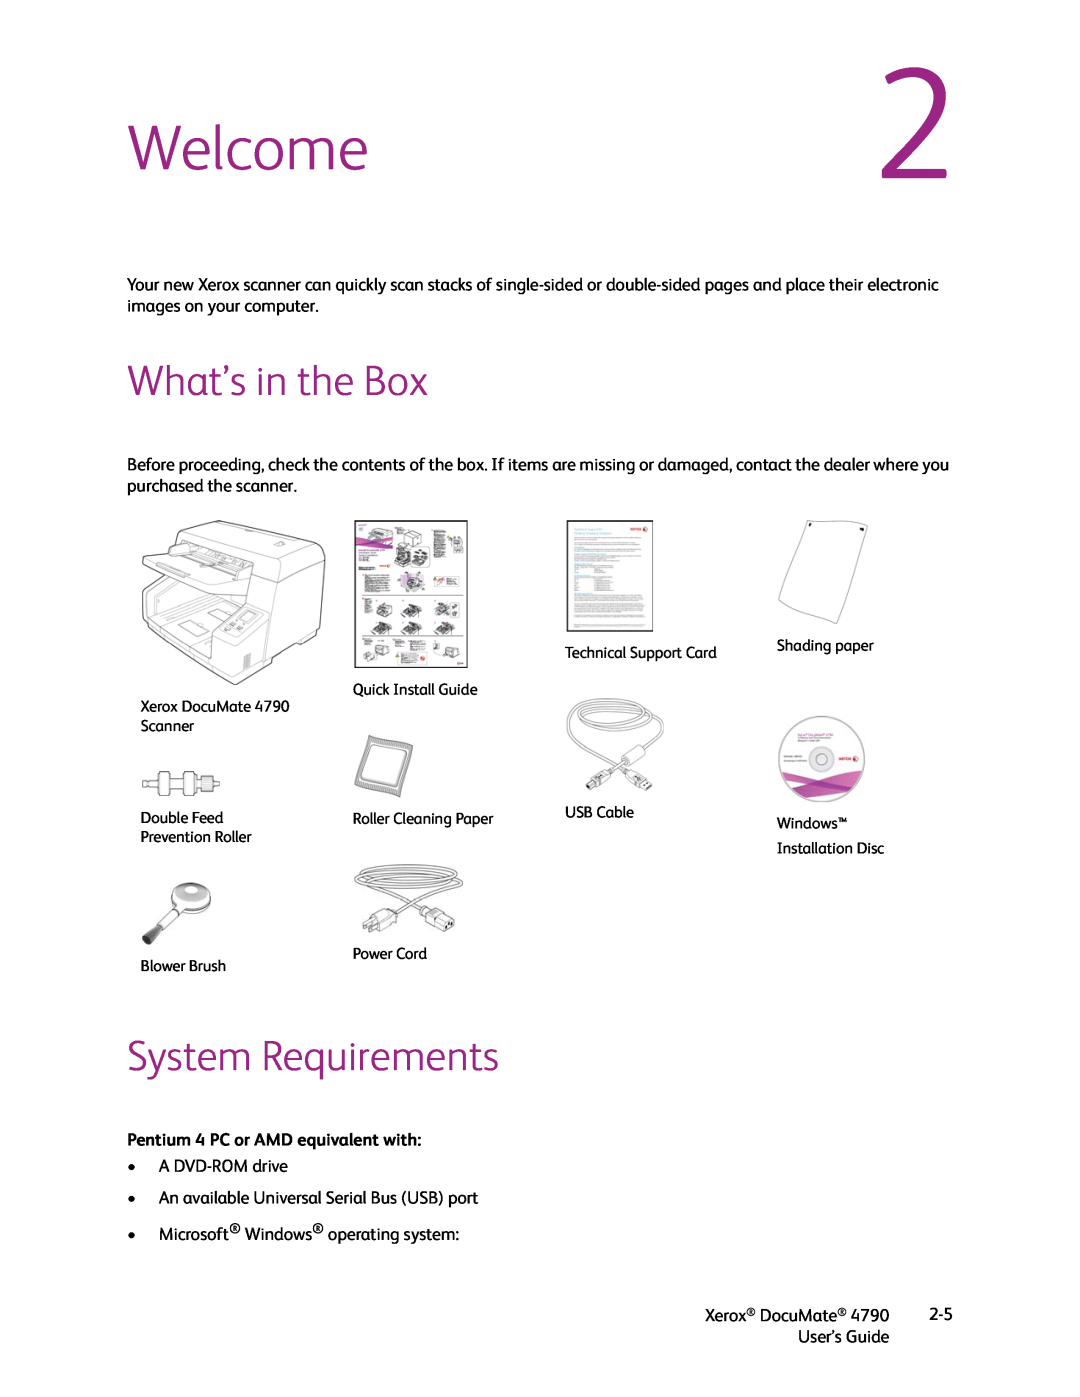 Xerox xerox documate manual Welcome2, What’s in the Box, System Requirements, Pentium 4 PC or AMD equivalent with 